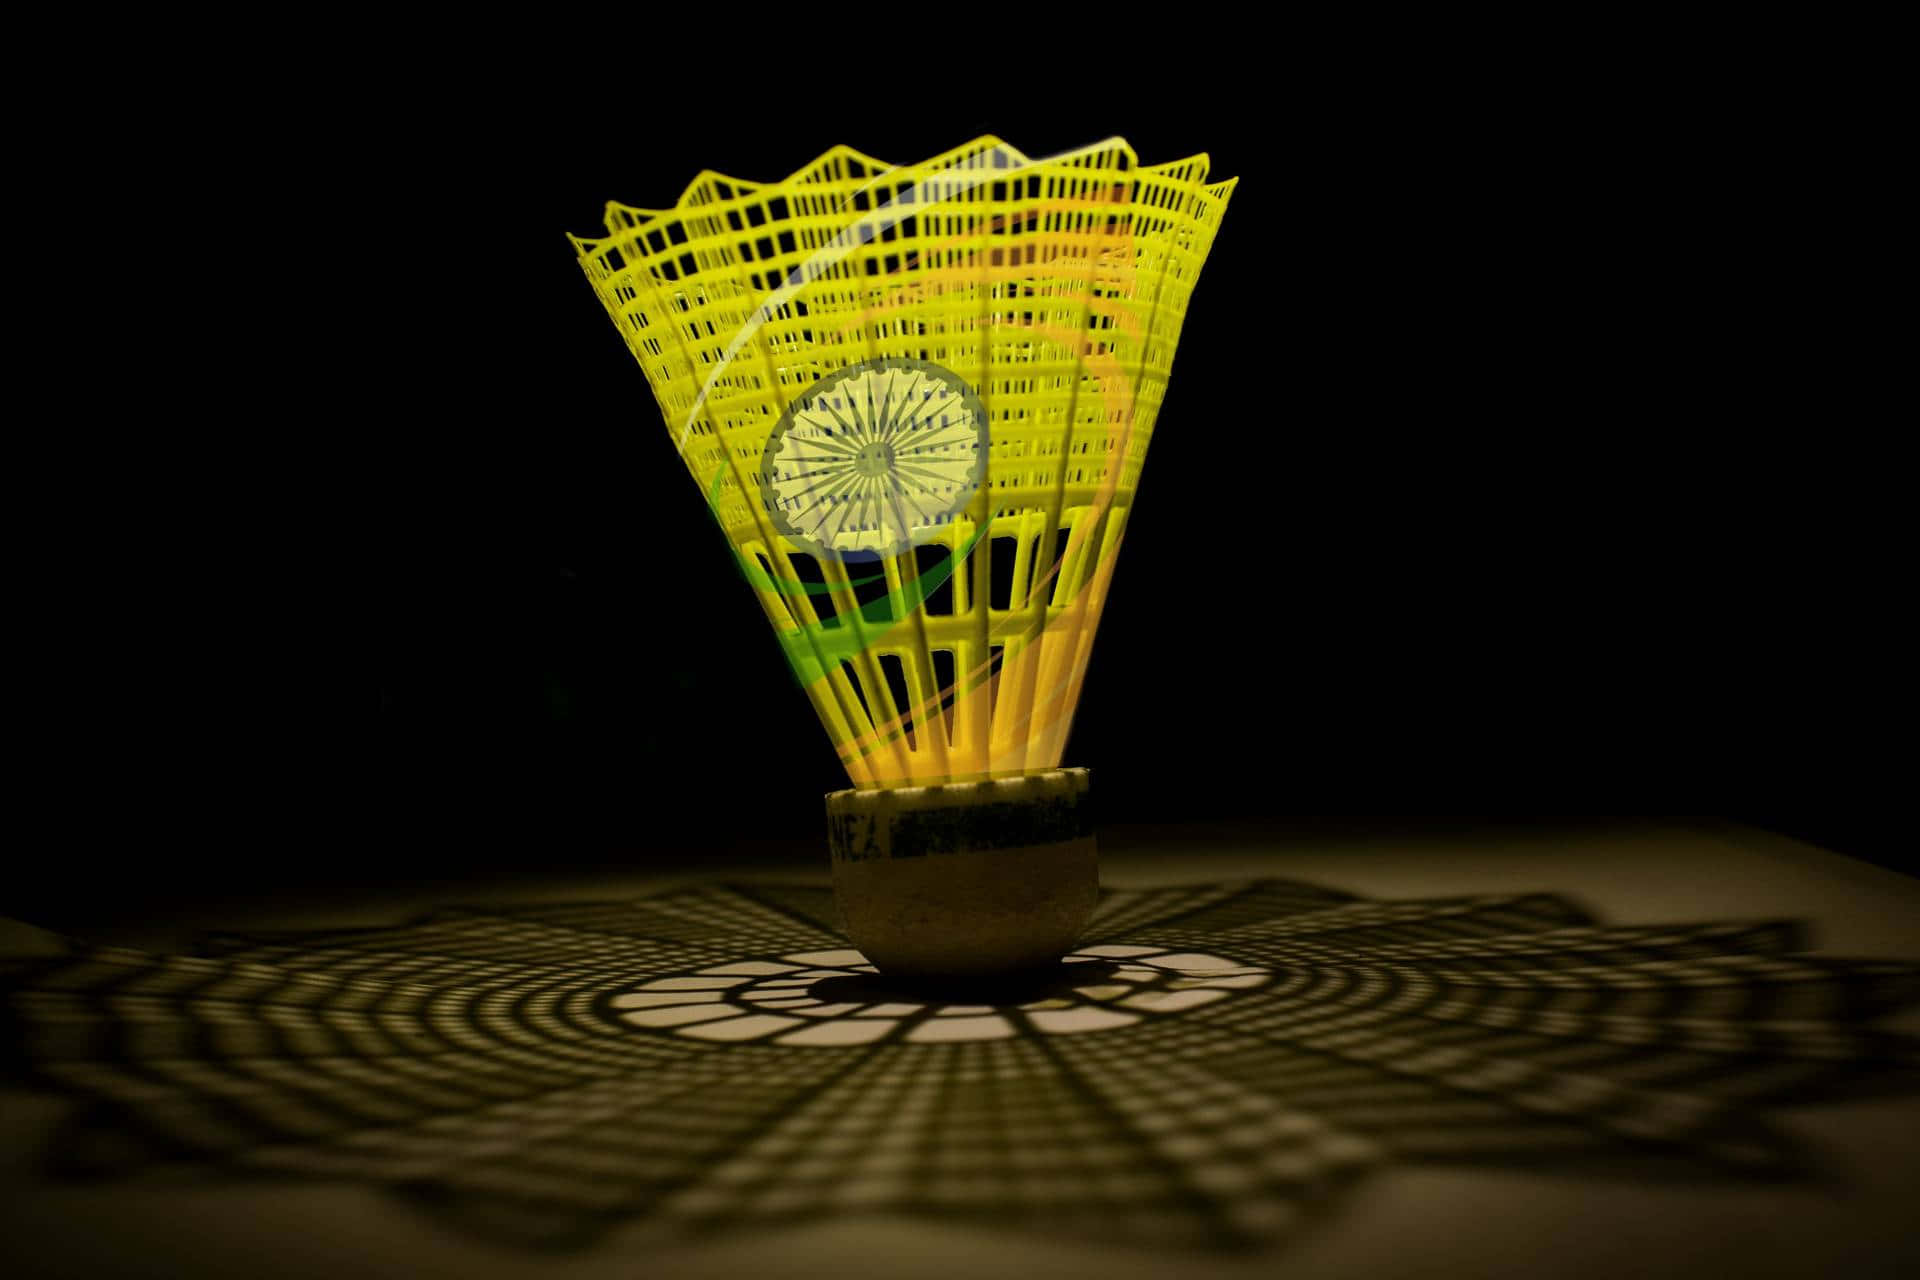 A Badminton Racket With A Yellow Design On It